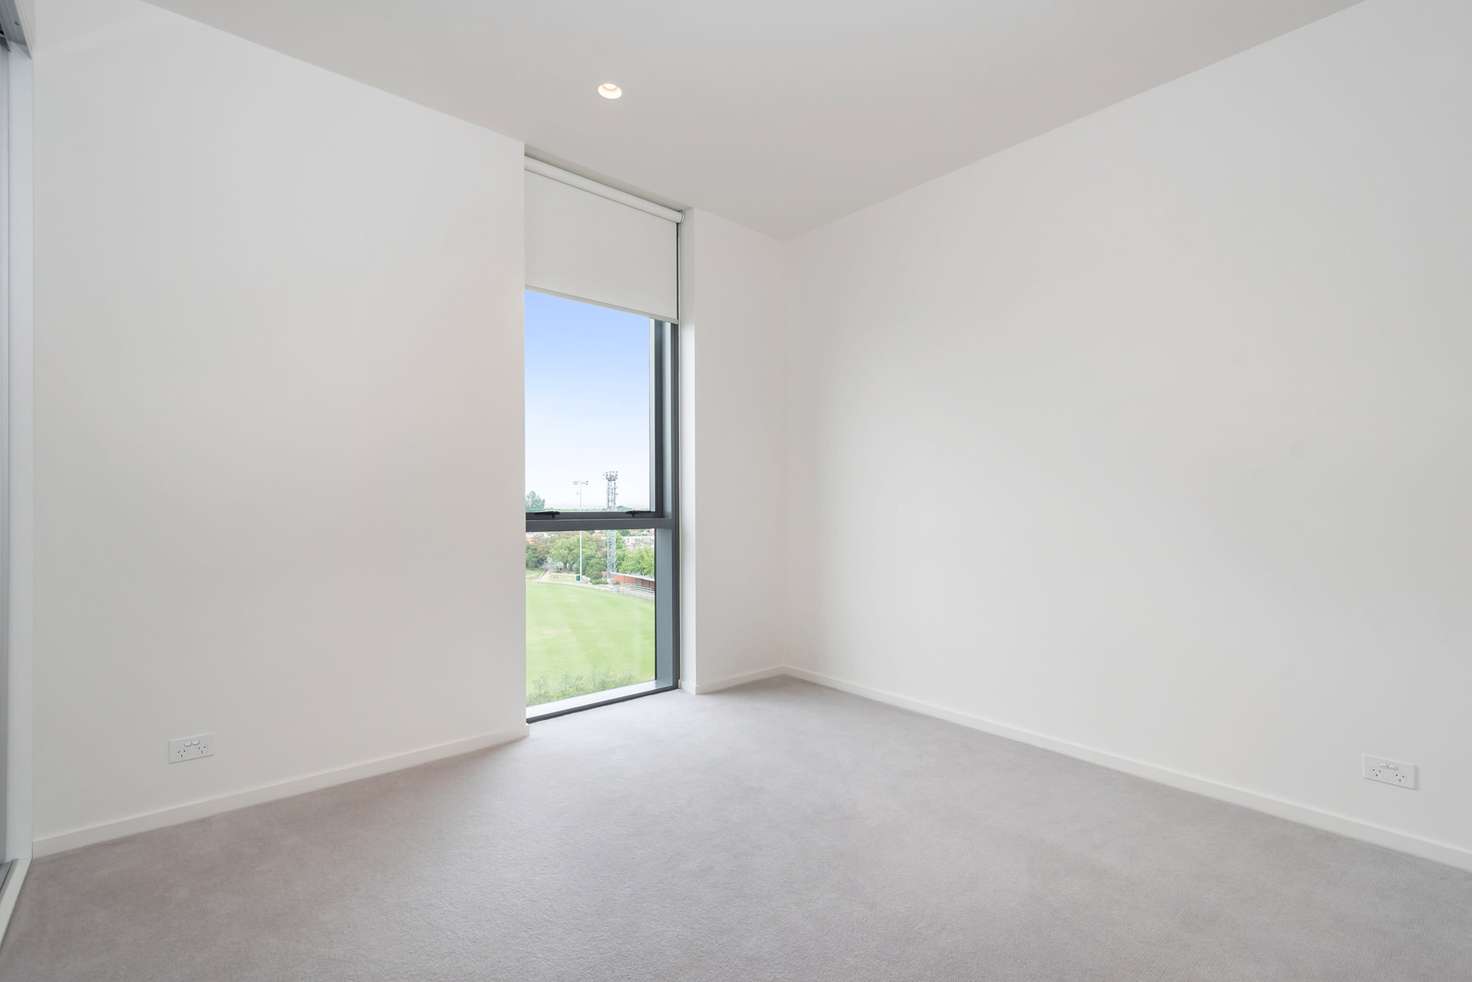 Main view of Homely apartment listing, 901/590 Orrong Road, Armadale VIC 3143